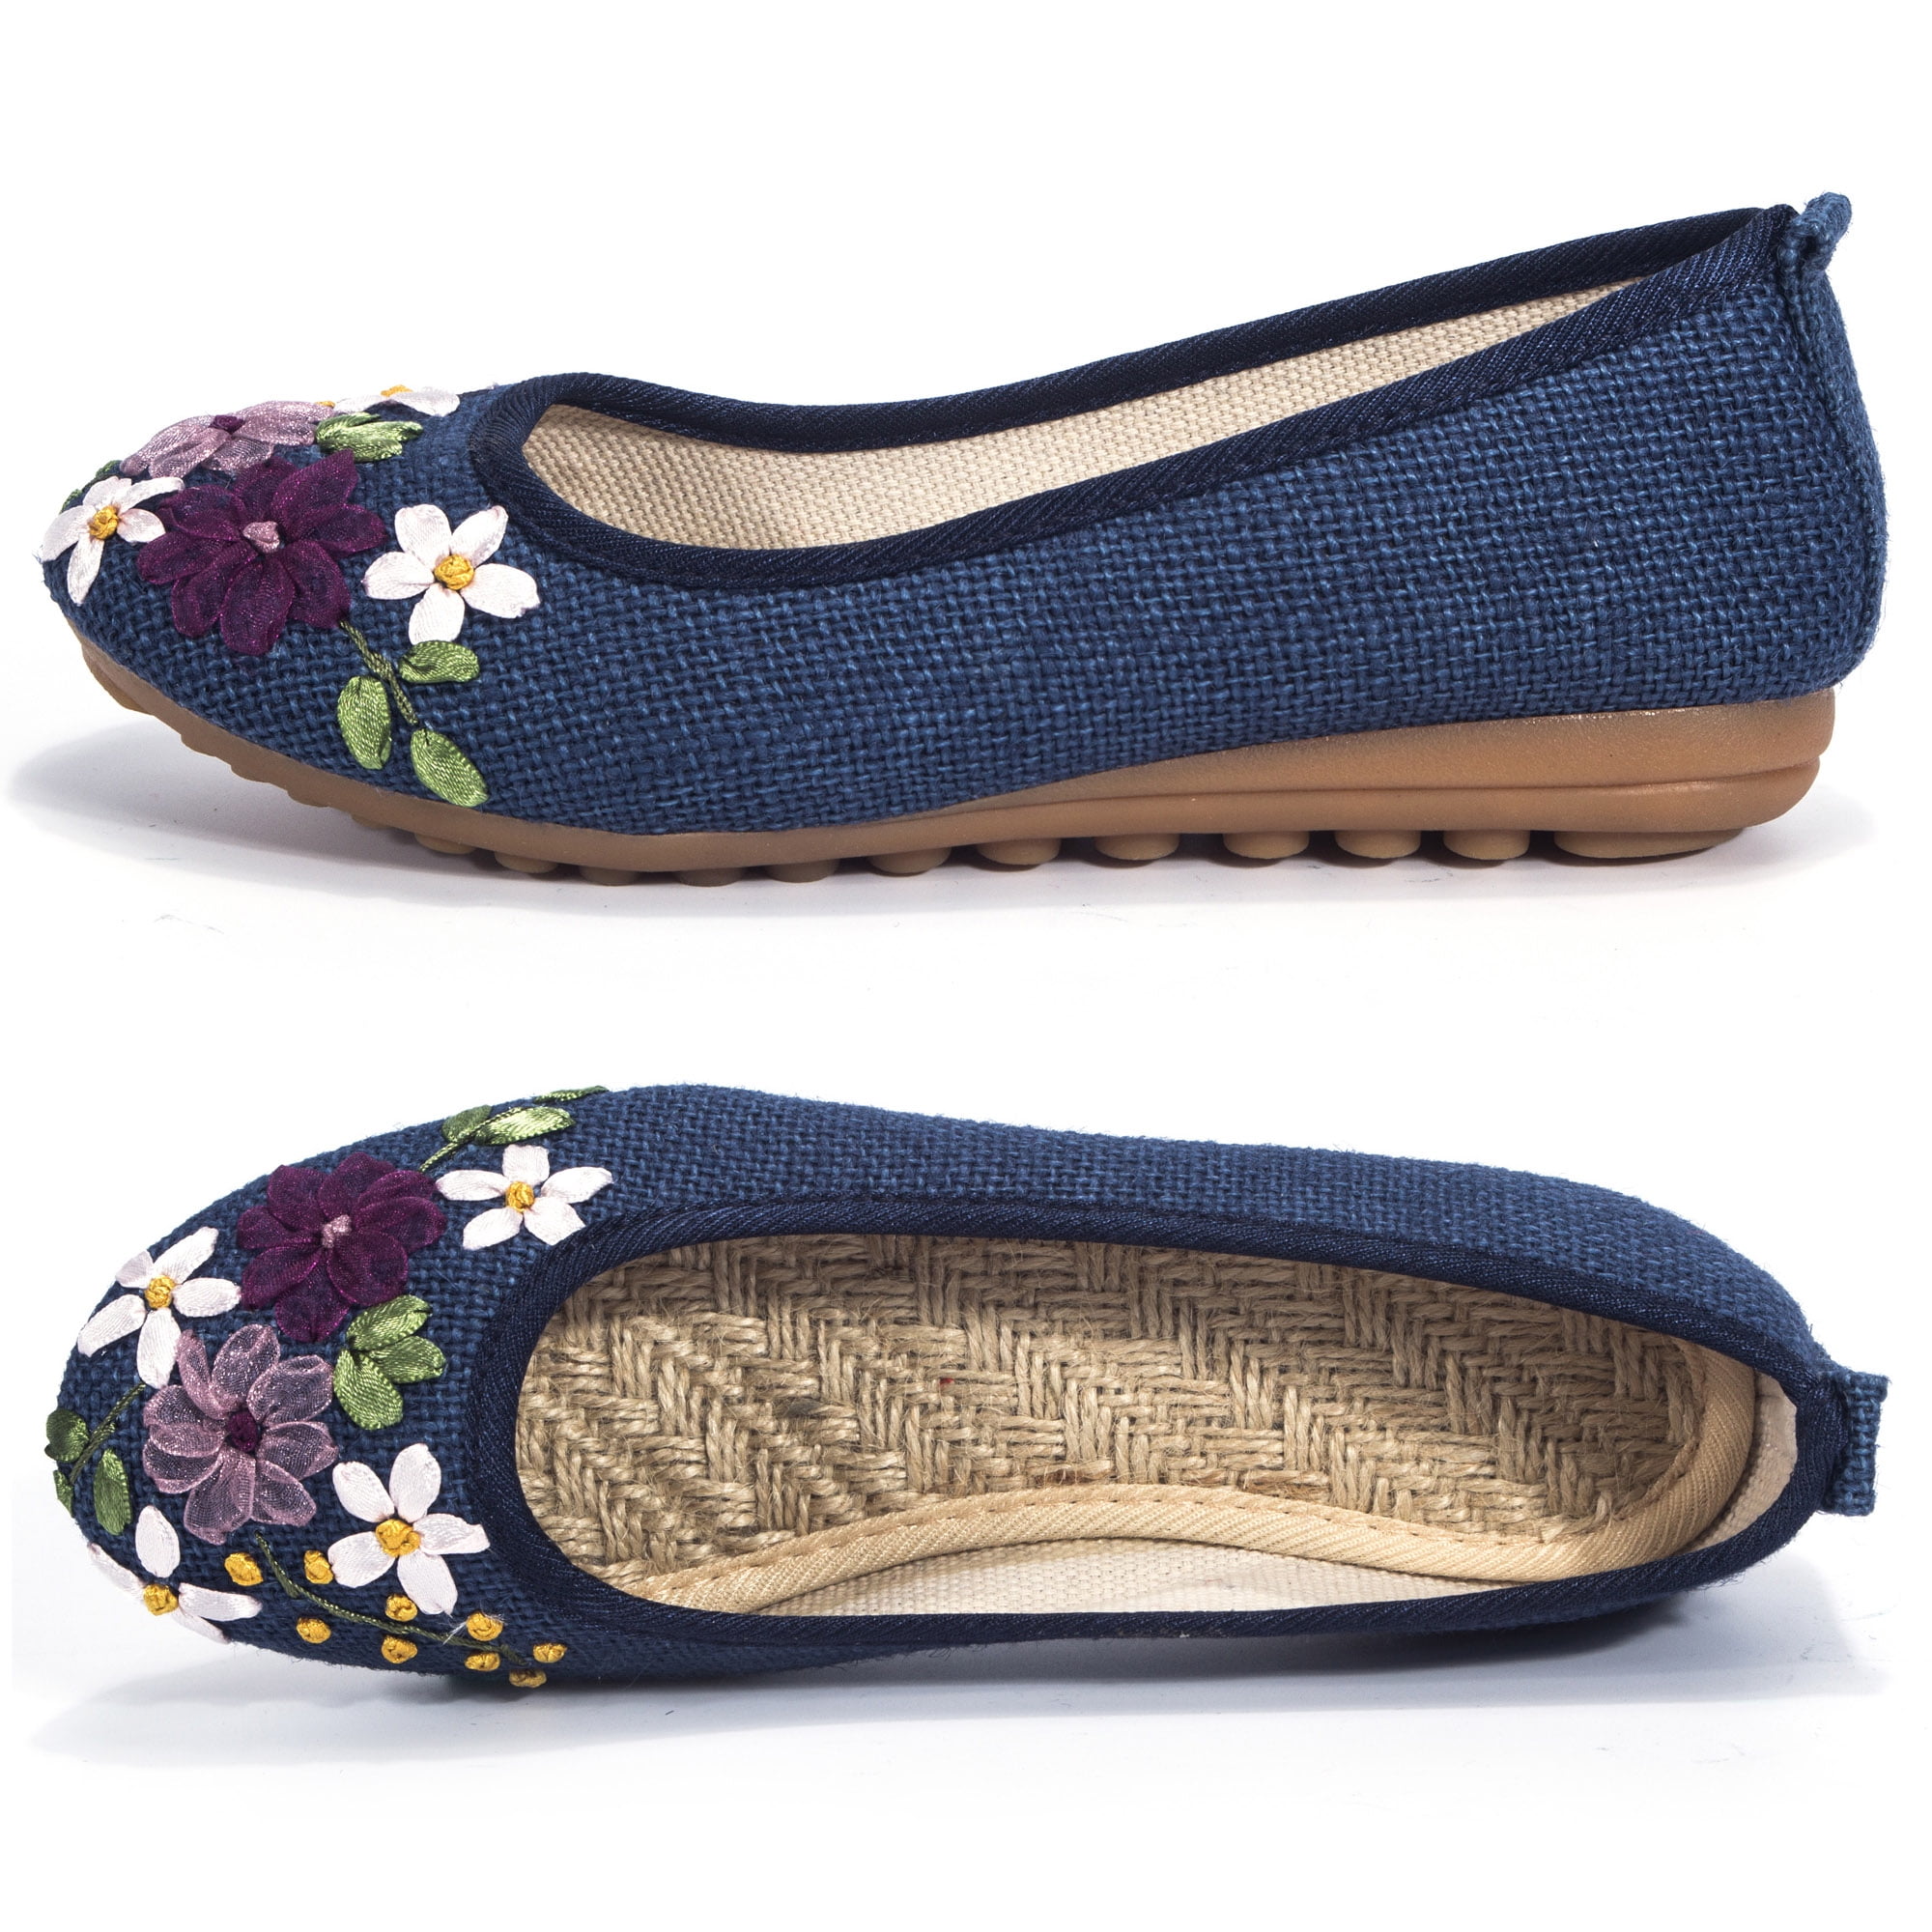 Women Fashion Flat Shoes Round Toe Handmade Floral Comfortable Slip On Casual Faux Leather Loafers